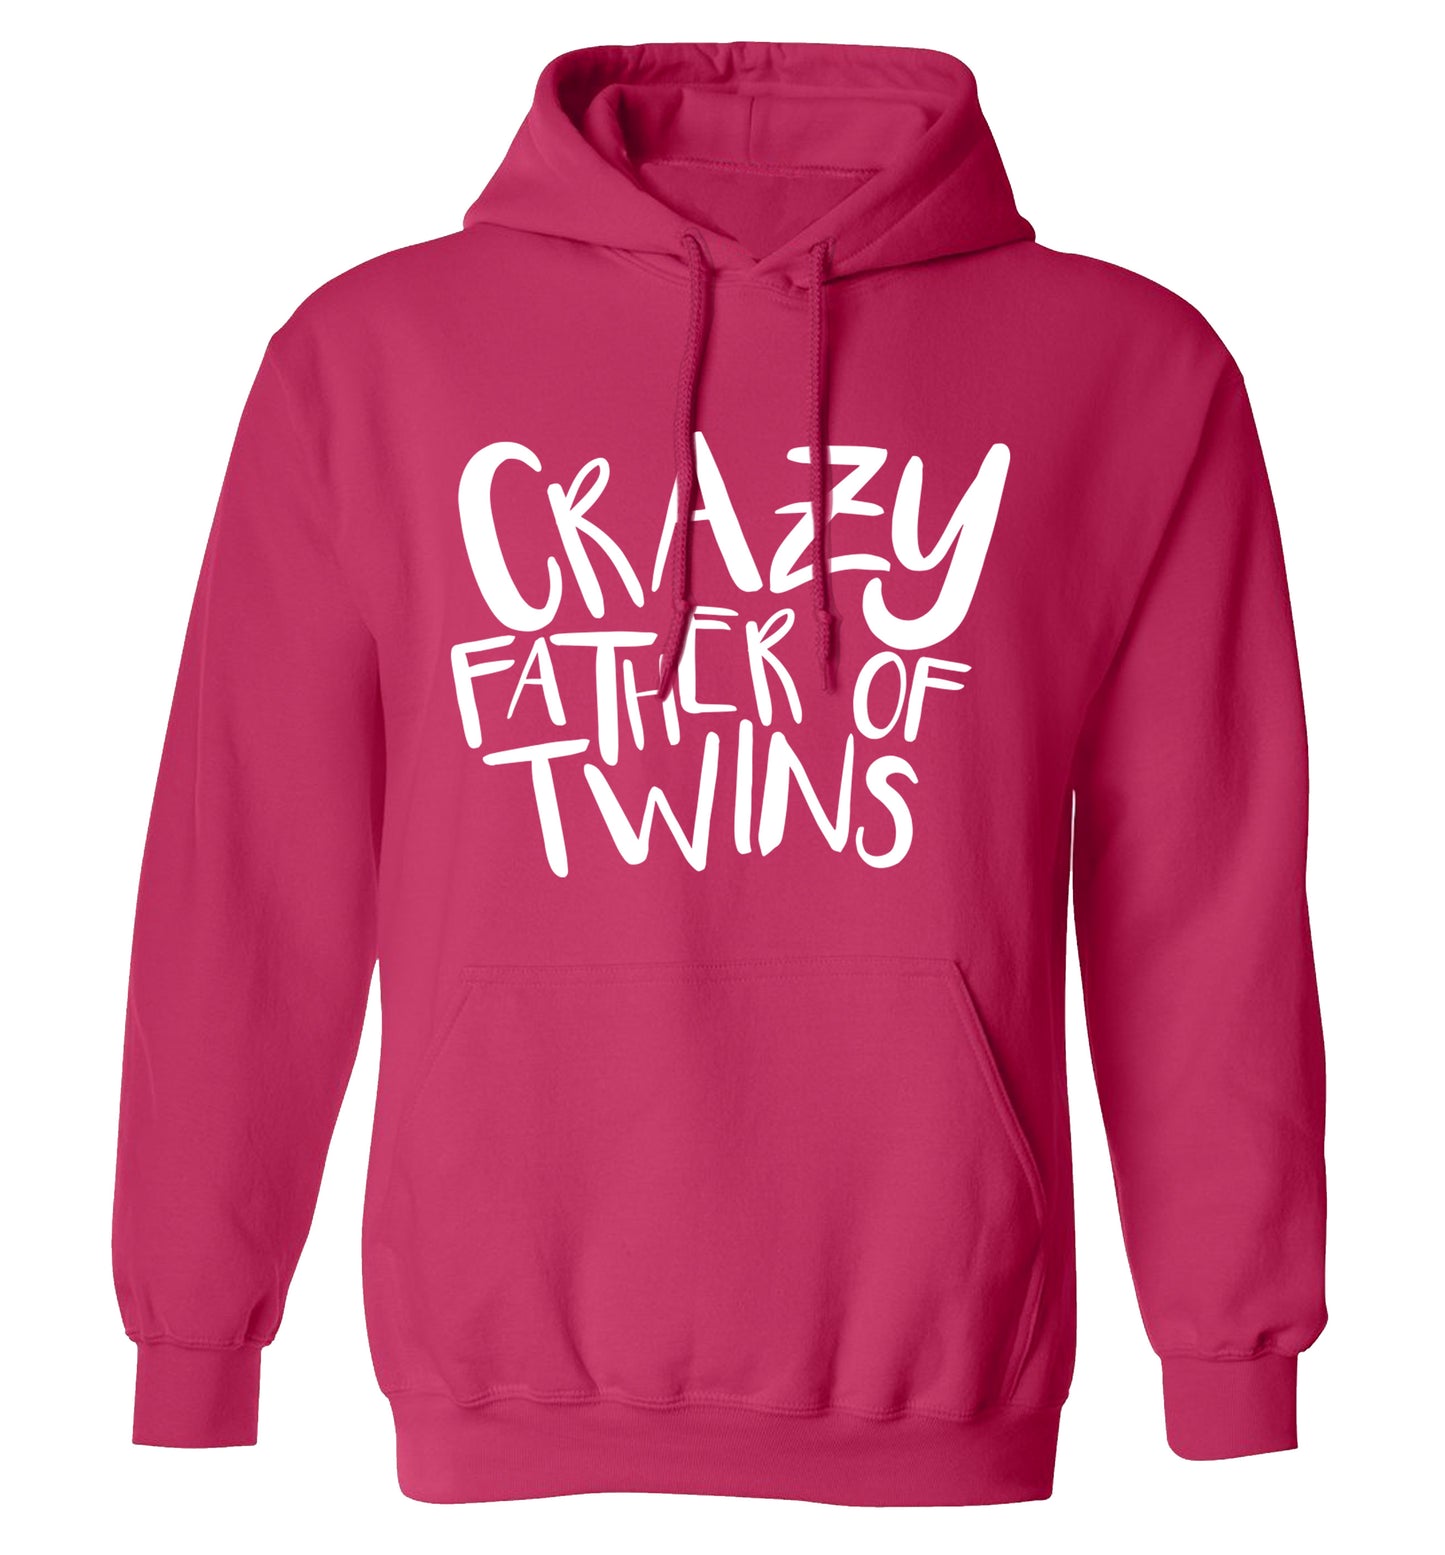 Crazy father of twins adults unisex pink hoodie 2XL